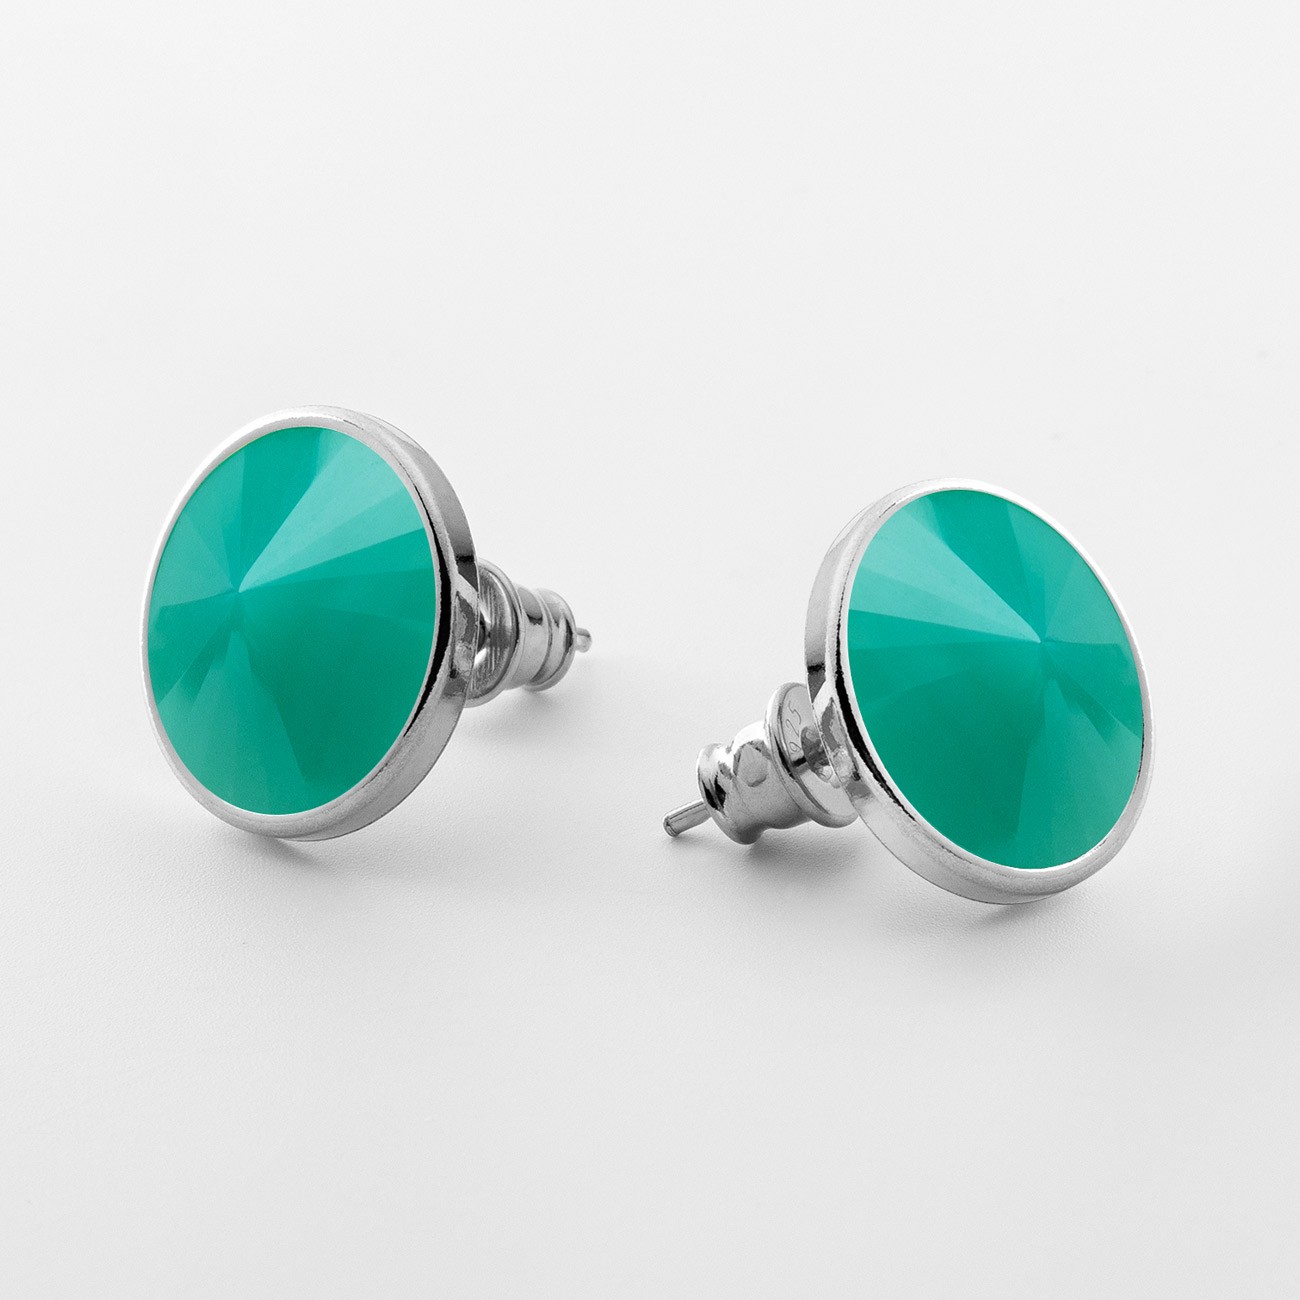 Earrings with round natural stone jadeite, 925